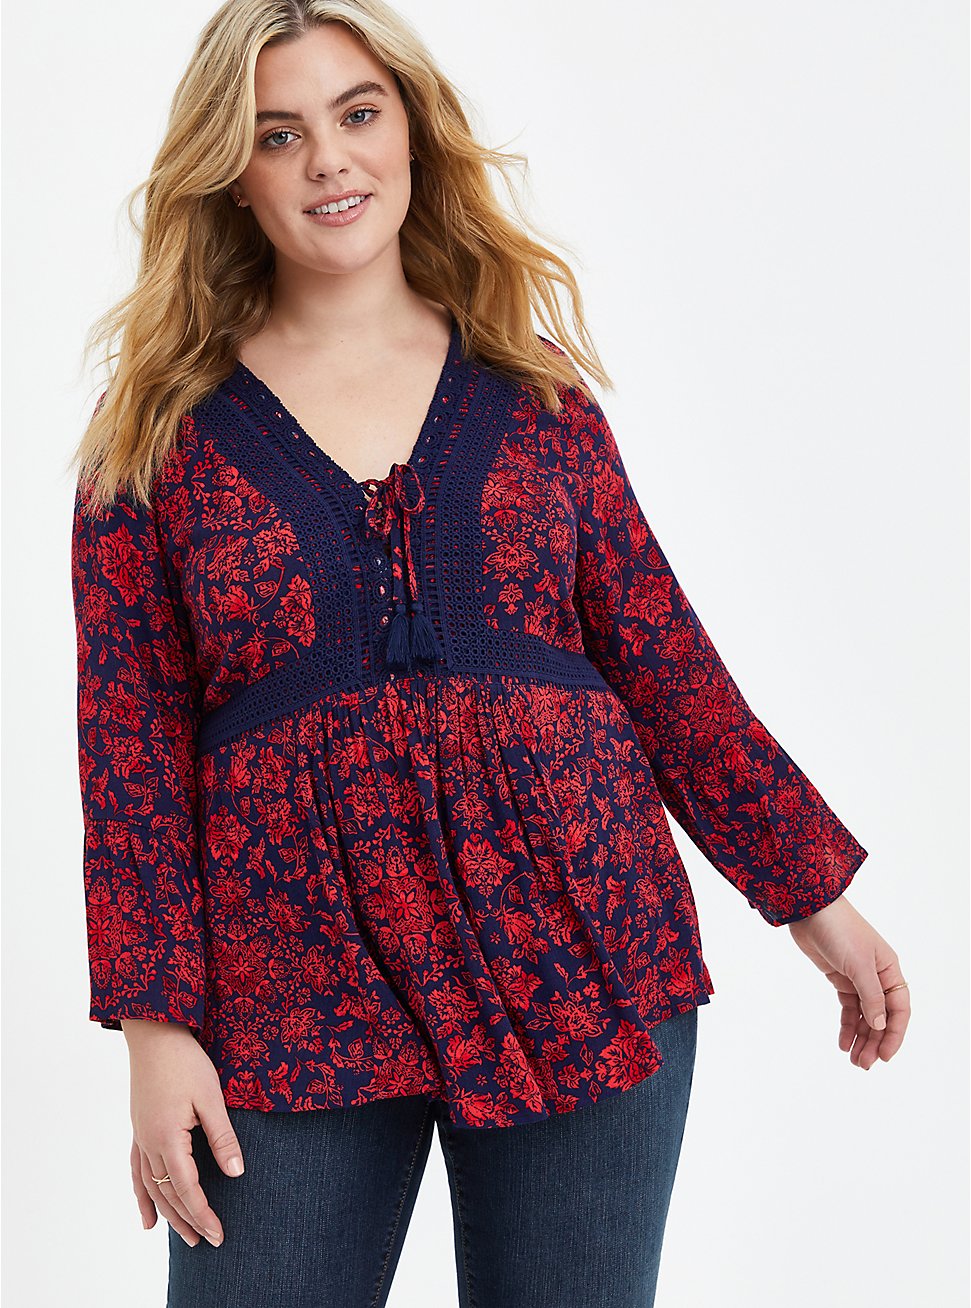 Lace-Up Babydoll Top - Crinkle Gauze Floral Red & Navy, OTHER PRINTS, hi-res